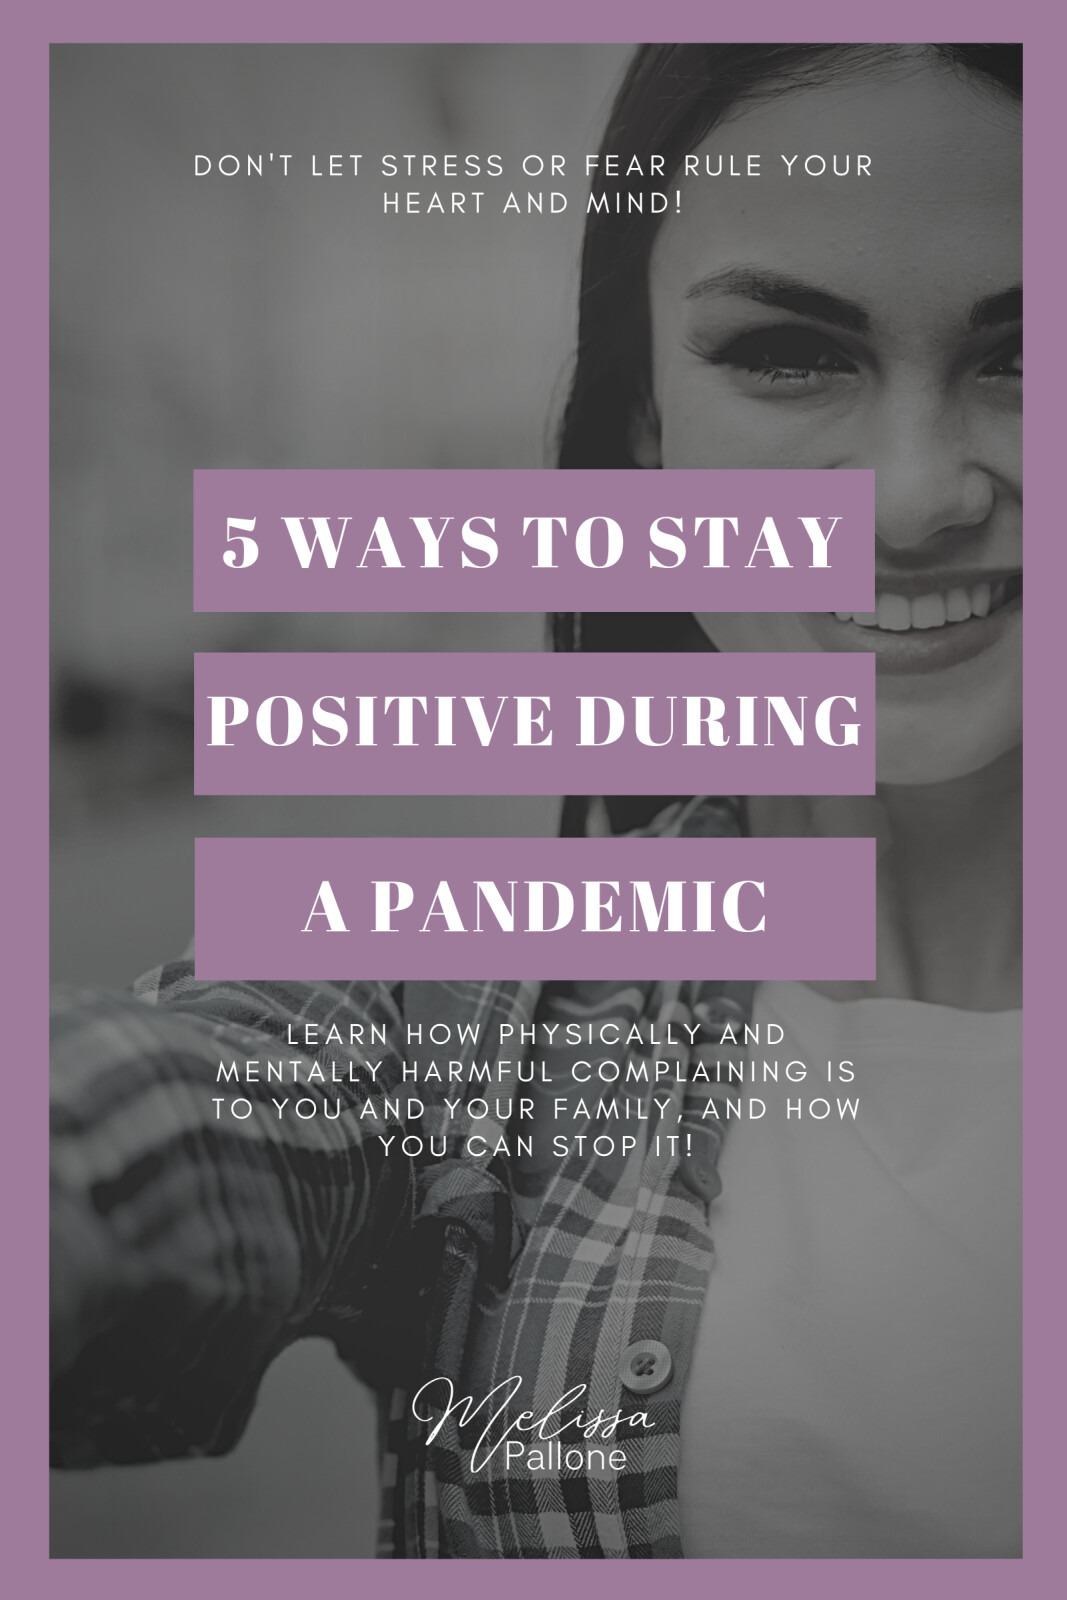 5 Ways to Stay Positive During a Pandemic